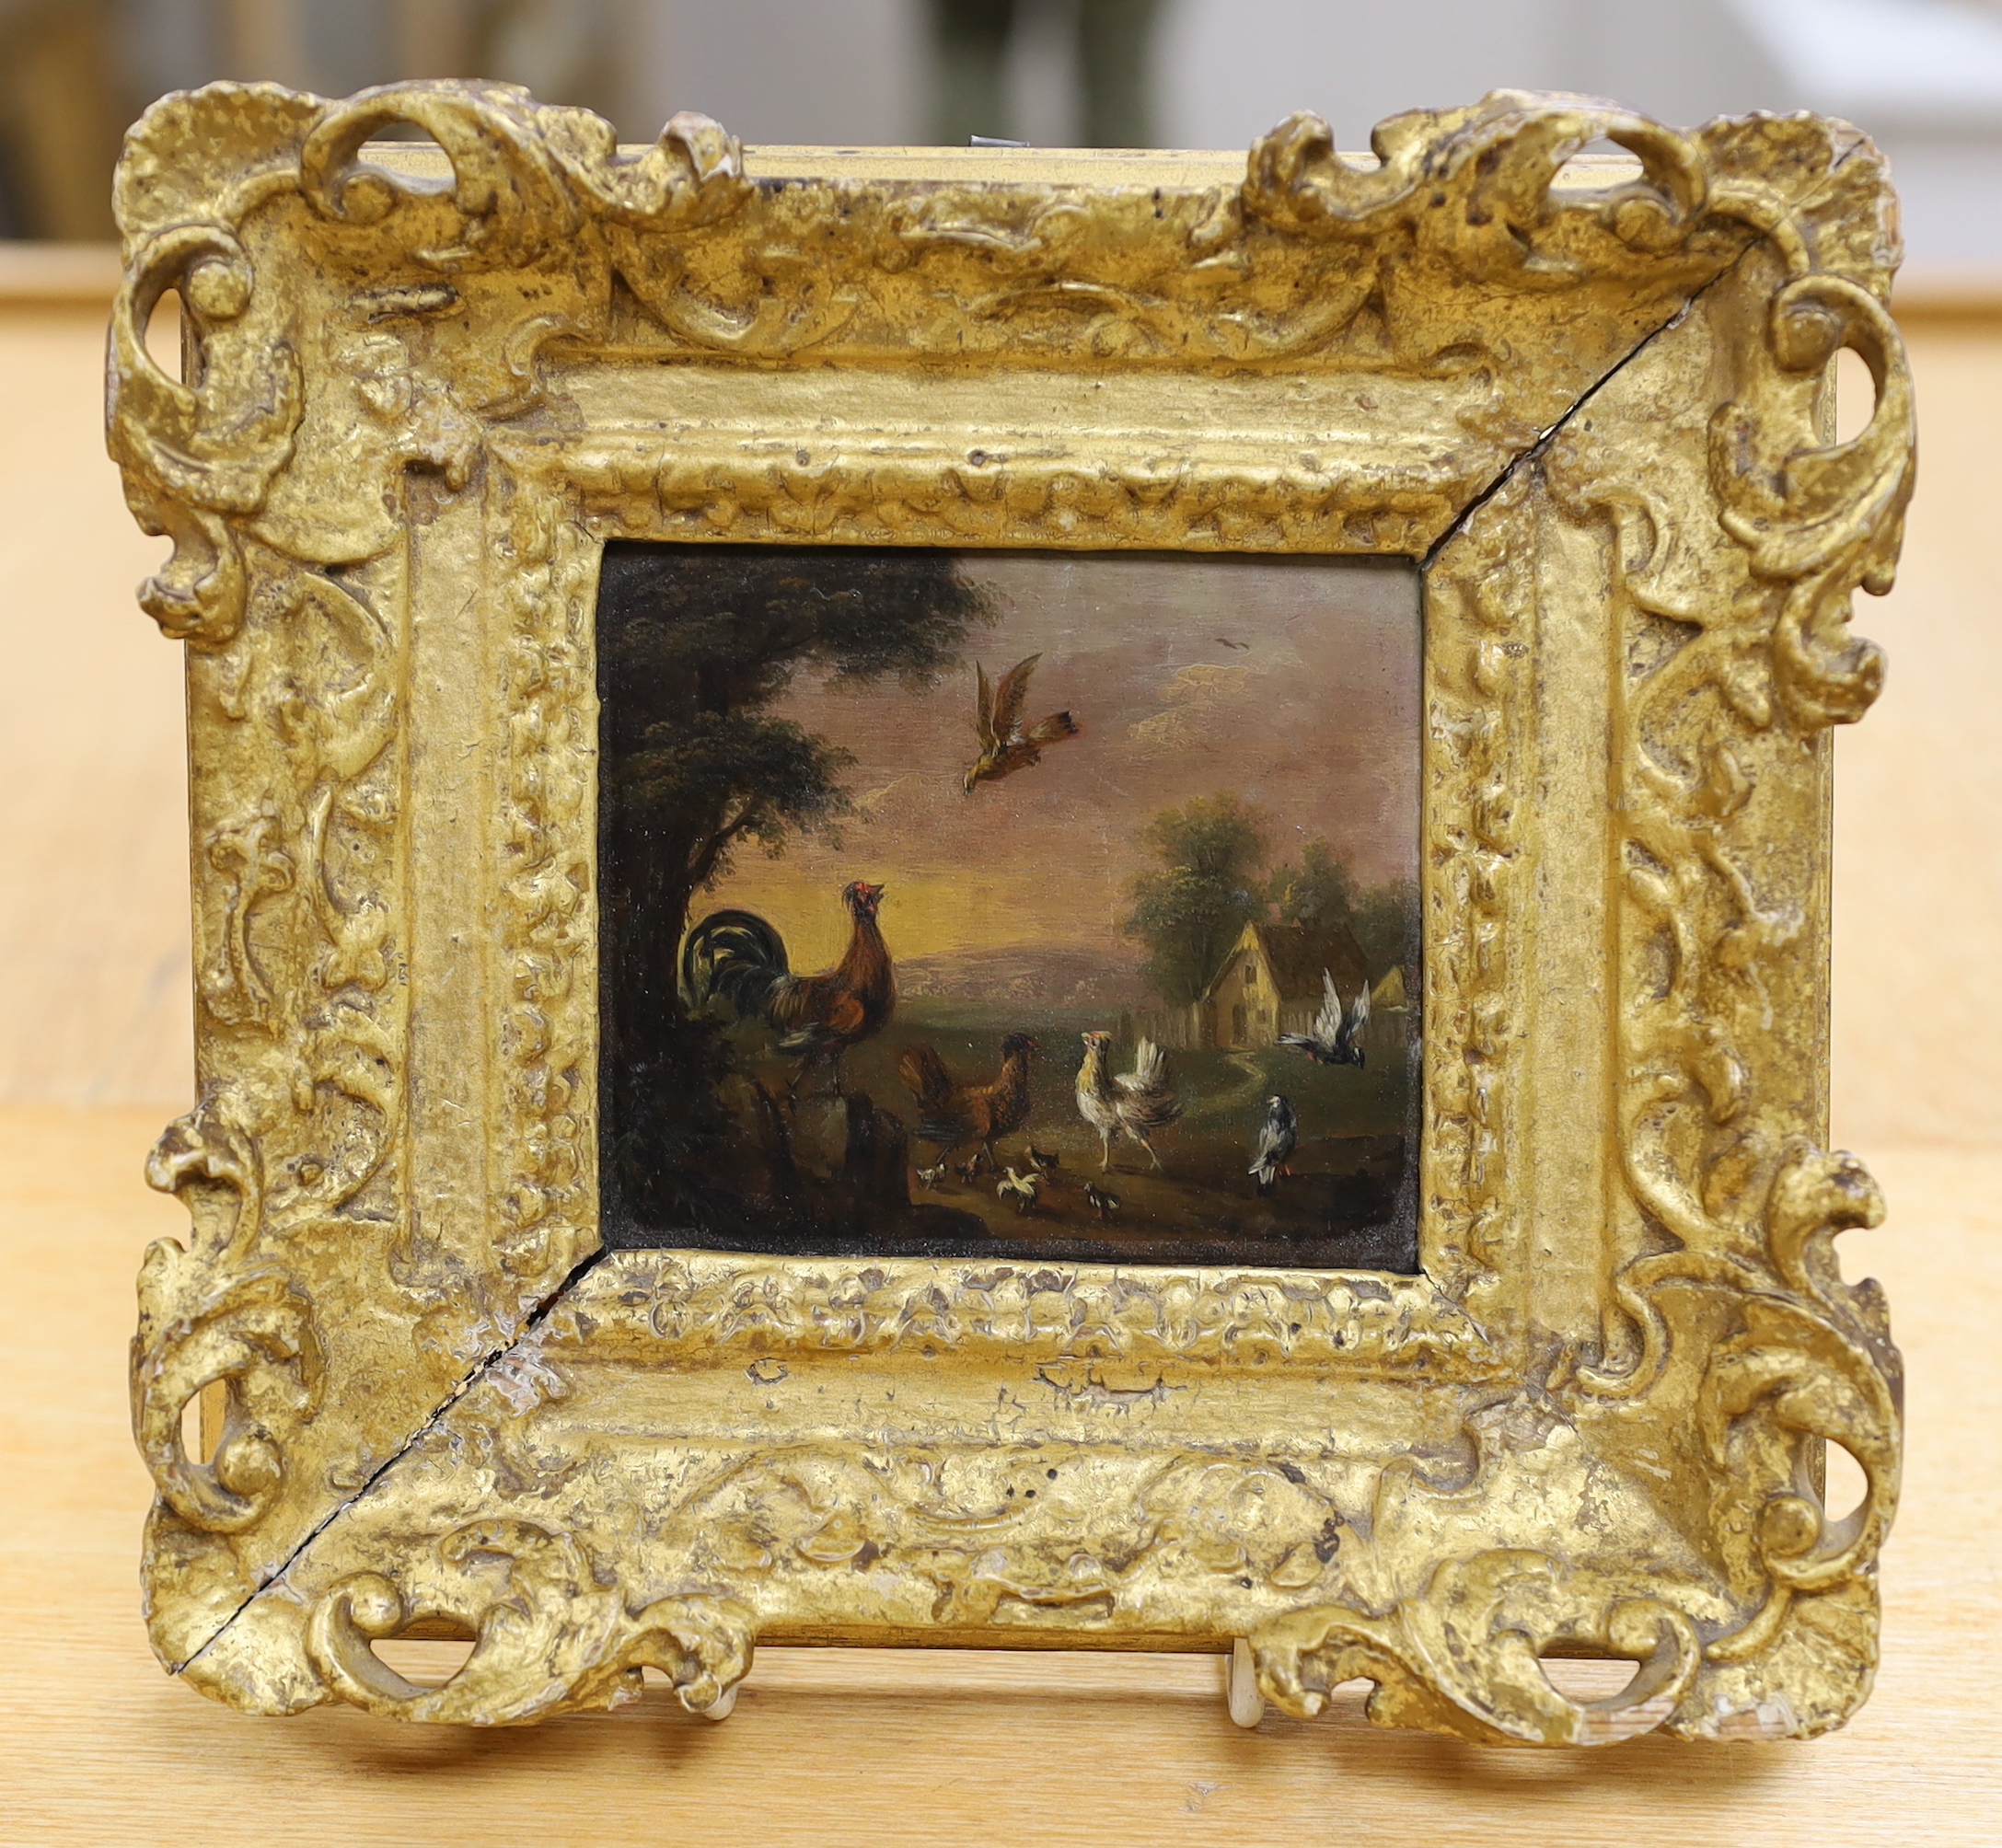 18th / 19th century Flemish School, oil on copper panel, Chicken and birds in a landscape, inscribed Cider House Galleries label verso, 7.5 x 9cm, ornate gilt frame